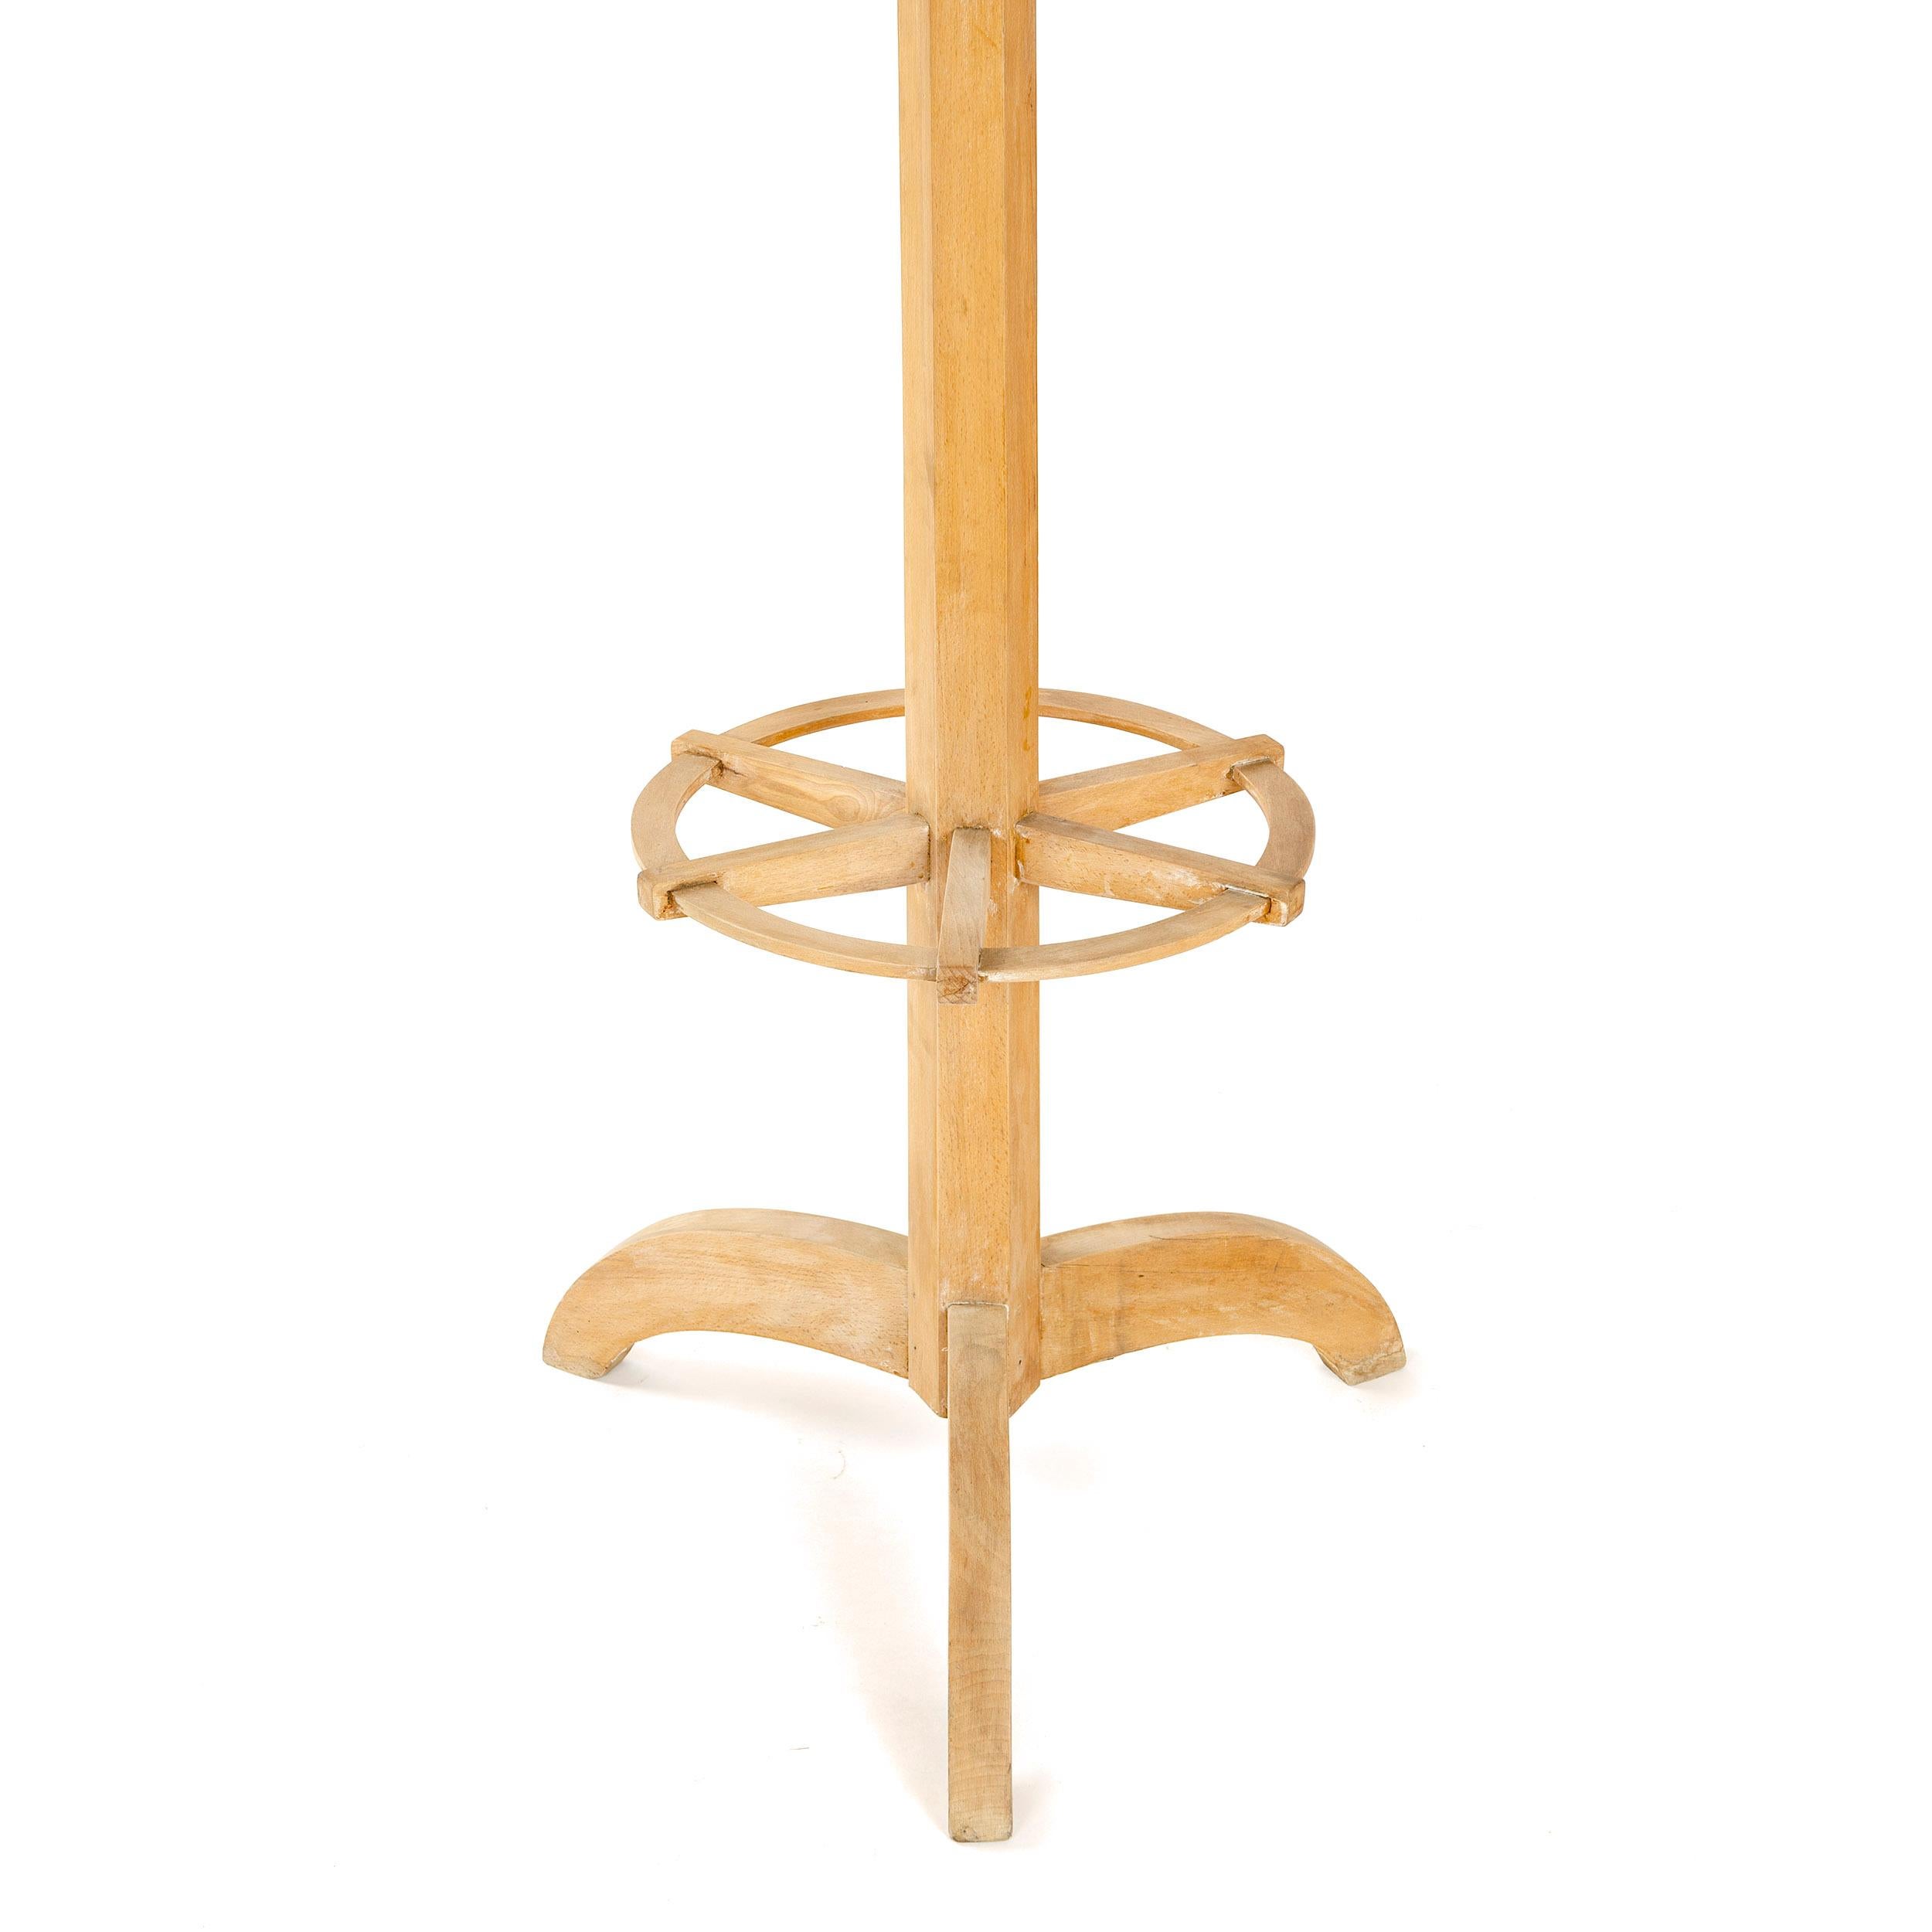 A simple Art Deco coat tree made from solid bleached mahogany with a rotating top.